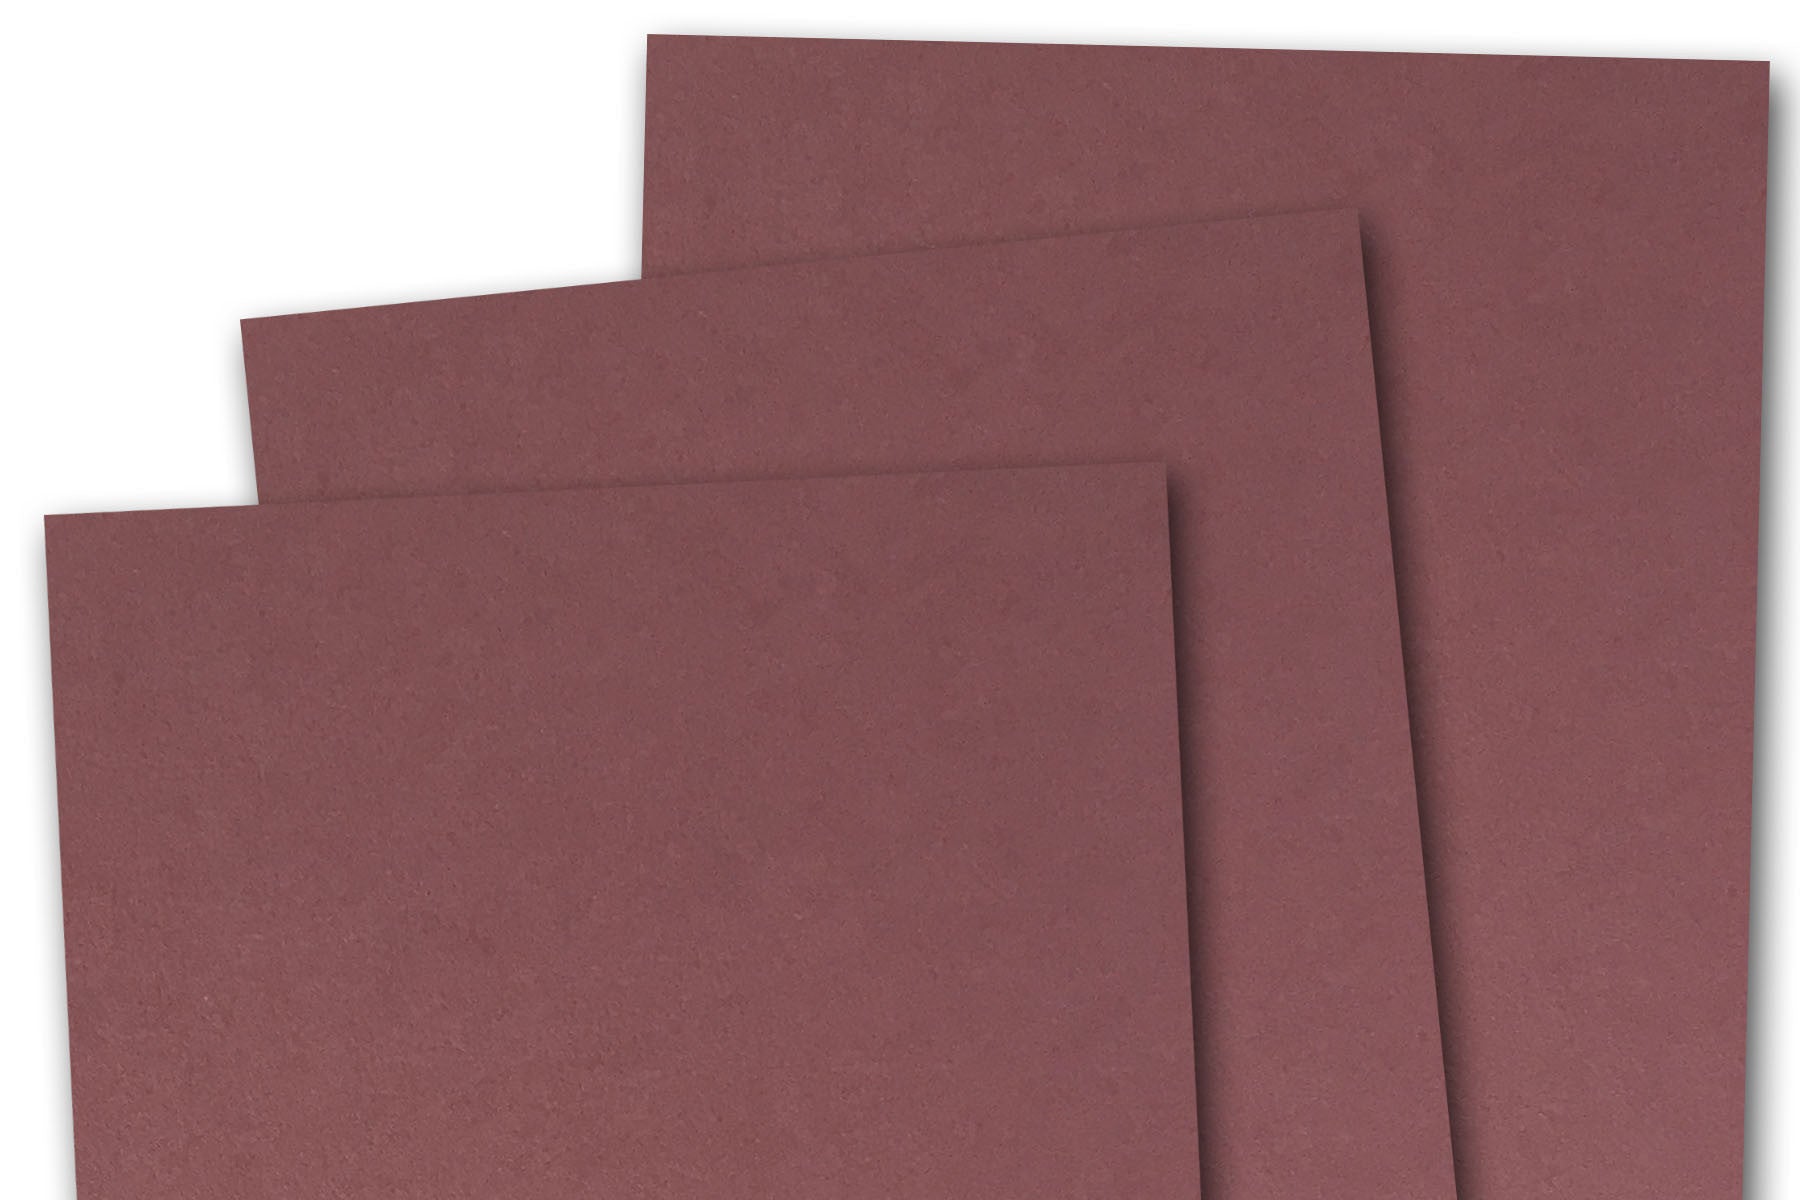 Burgundy 8-1/2-x-11 BASIS Paper, 25 per package, 216 GSM (80lb Cover)